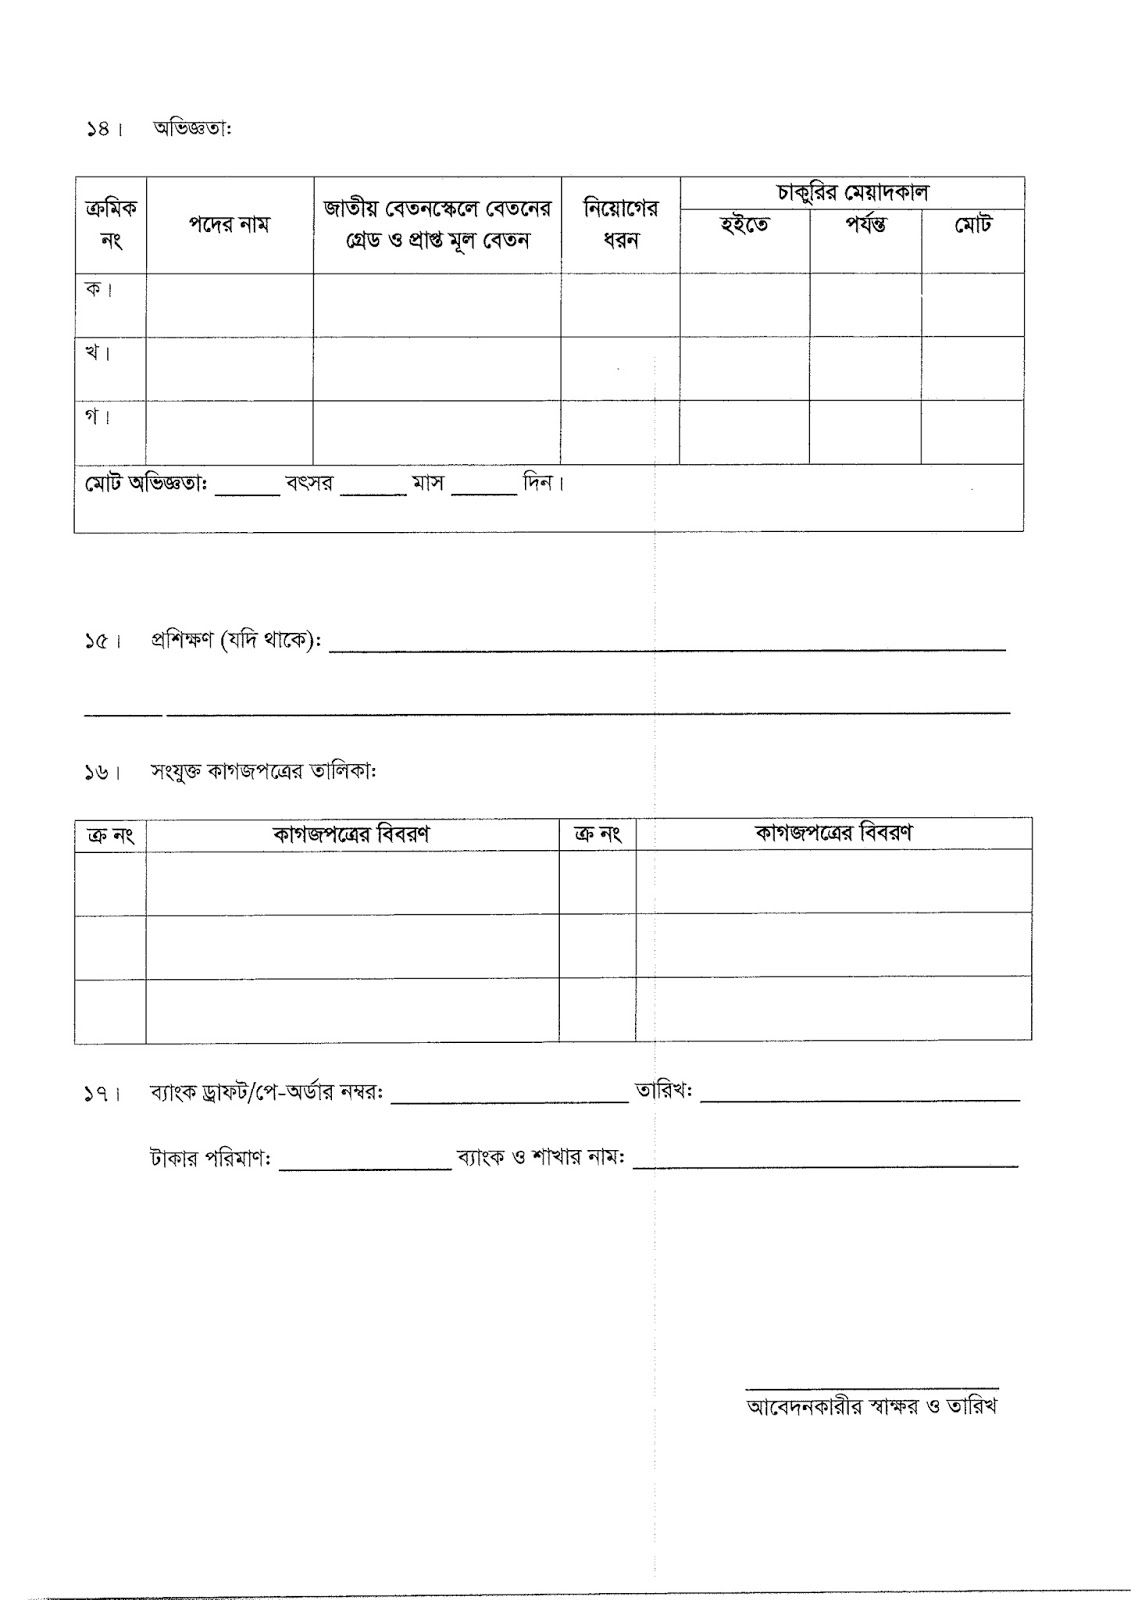 BUP Employee Application Form